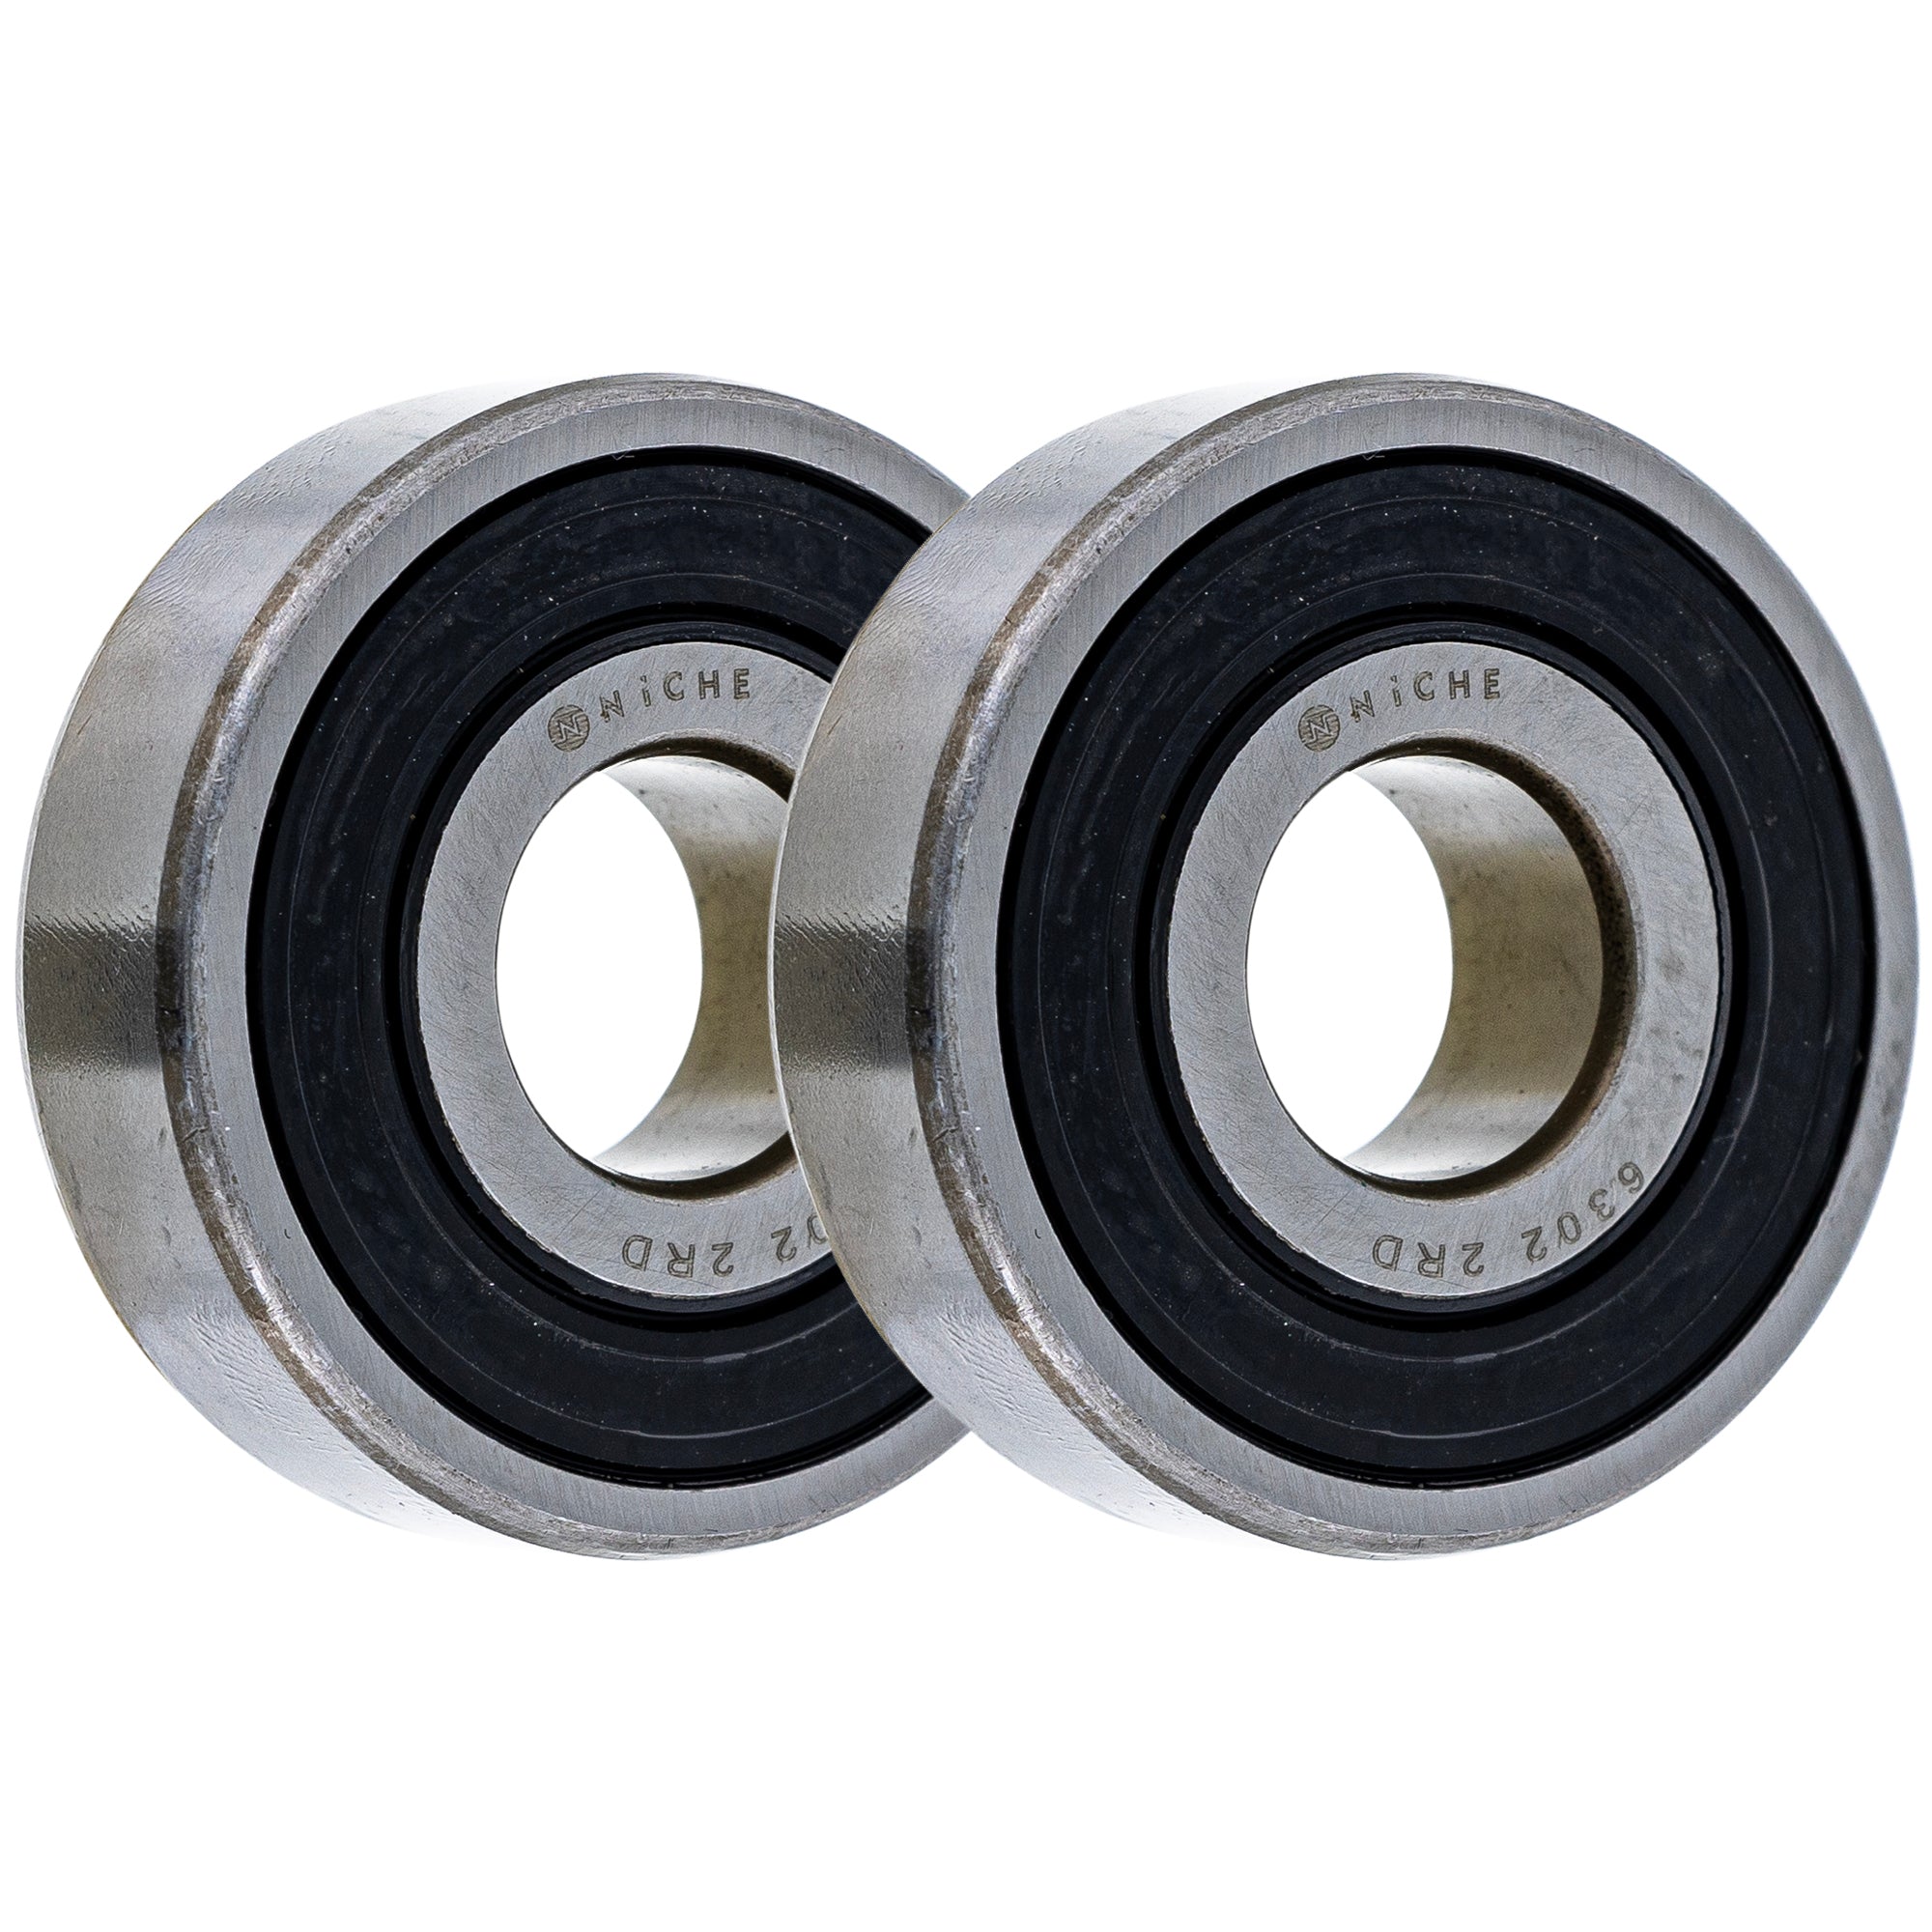 Single Row, Deep Groove, Ball Bearing Pack of 2 2-Pack for zOTHER XR200R XR200 XR185 XL350 NICHE 519-CBB2324R